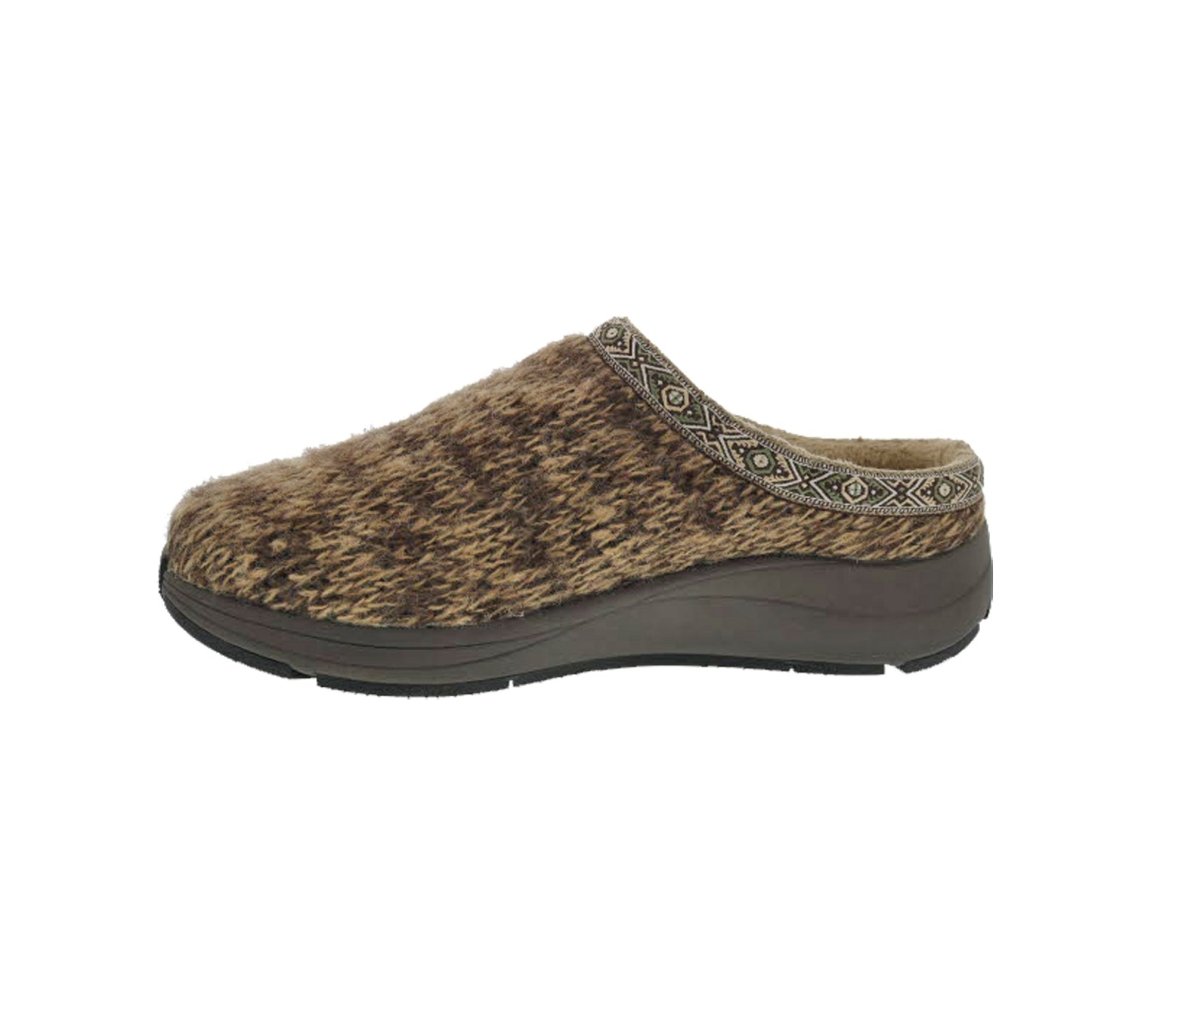 DREW RELAX MEN SLIPPERS IN BROWN WOVEN - TLW Shoes